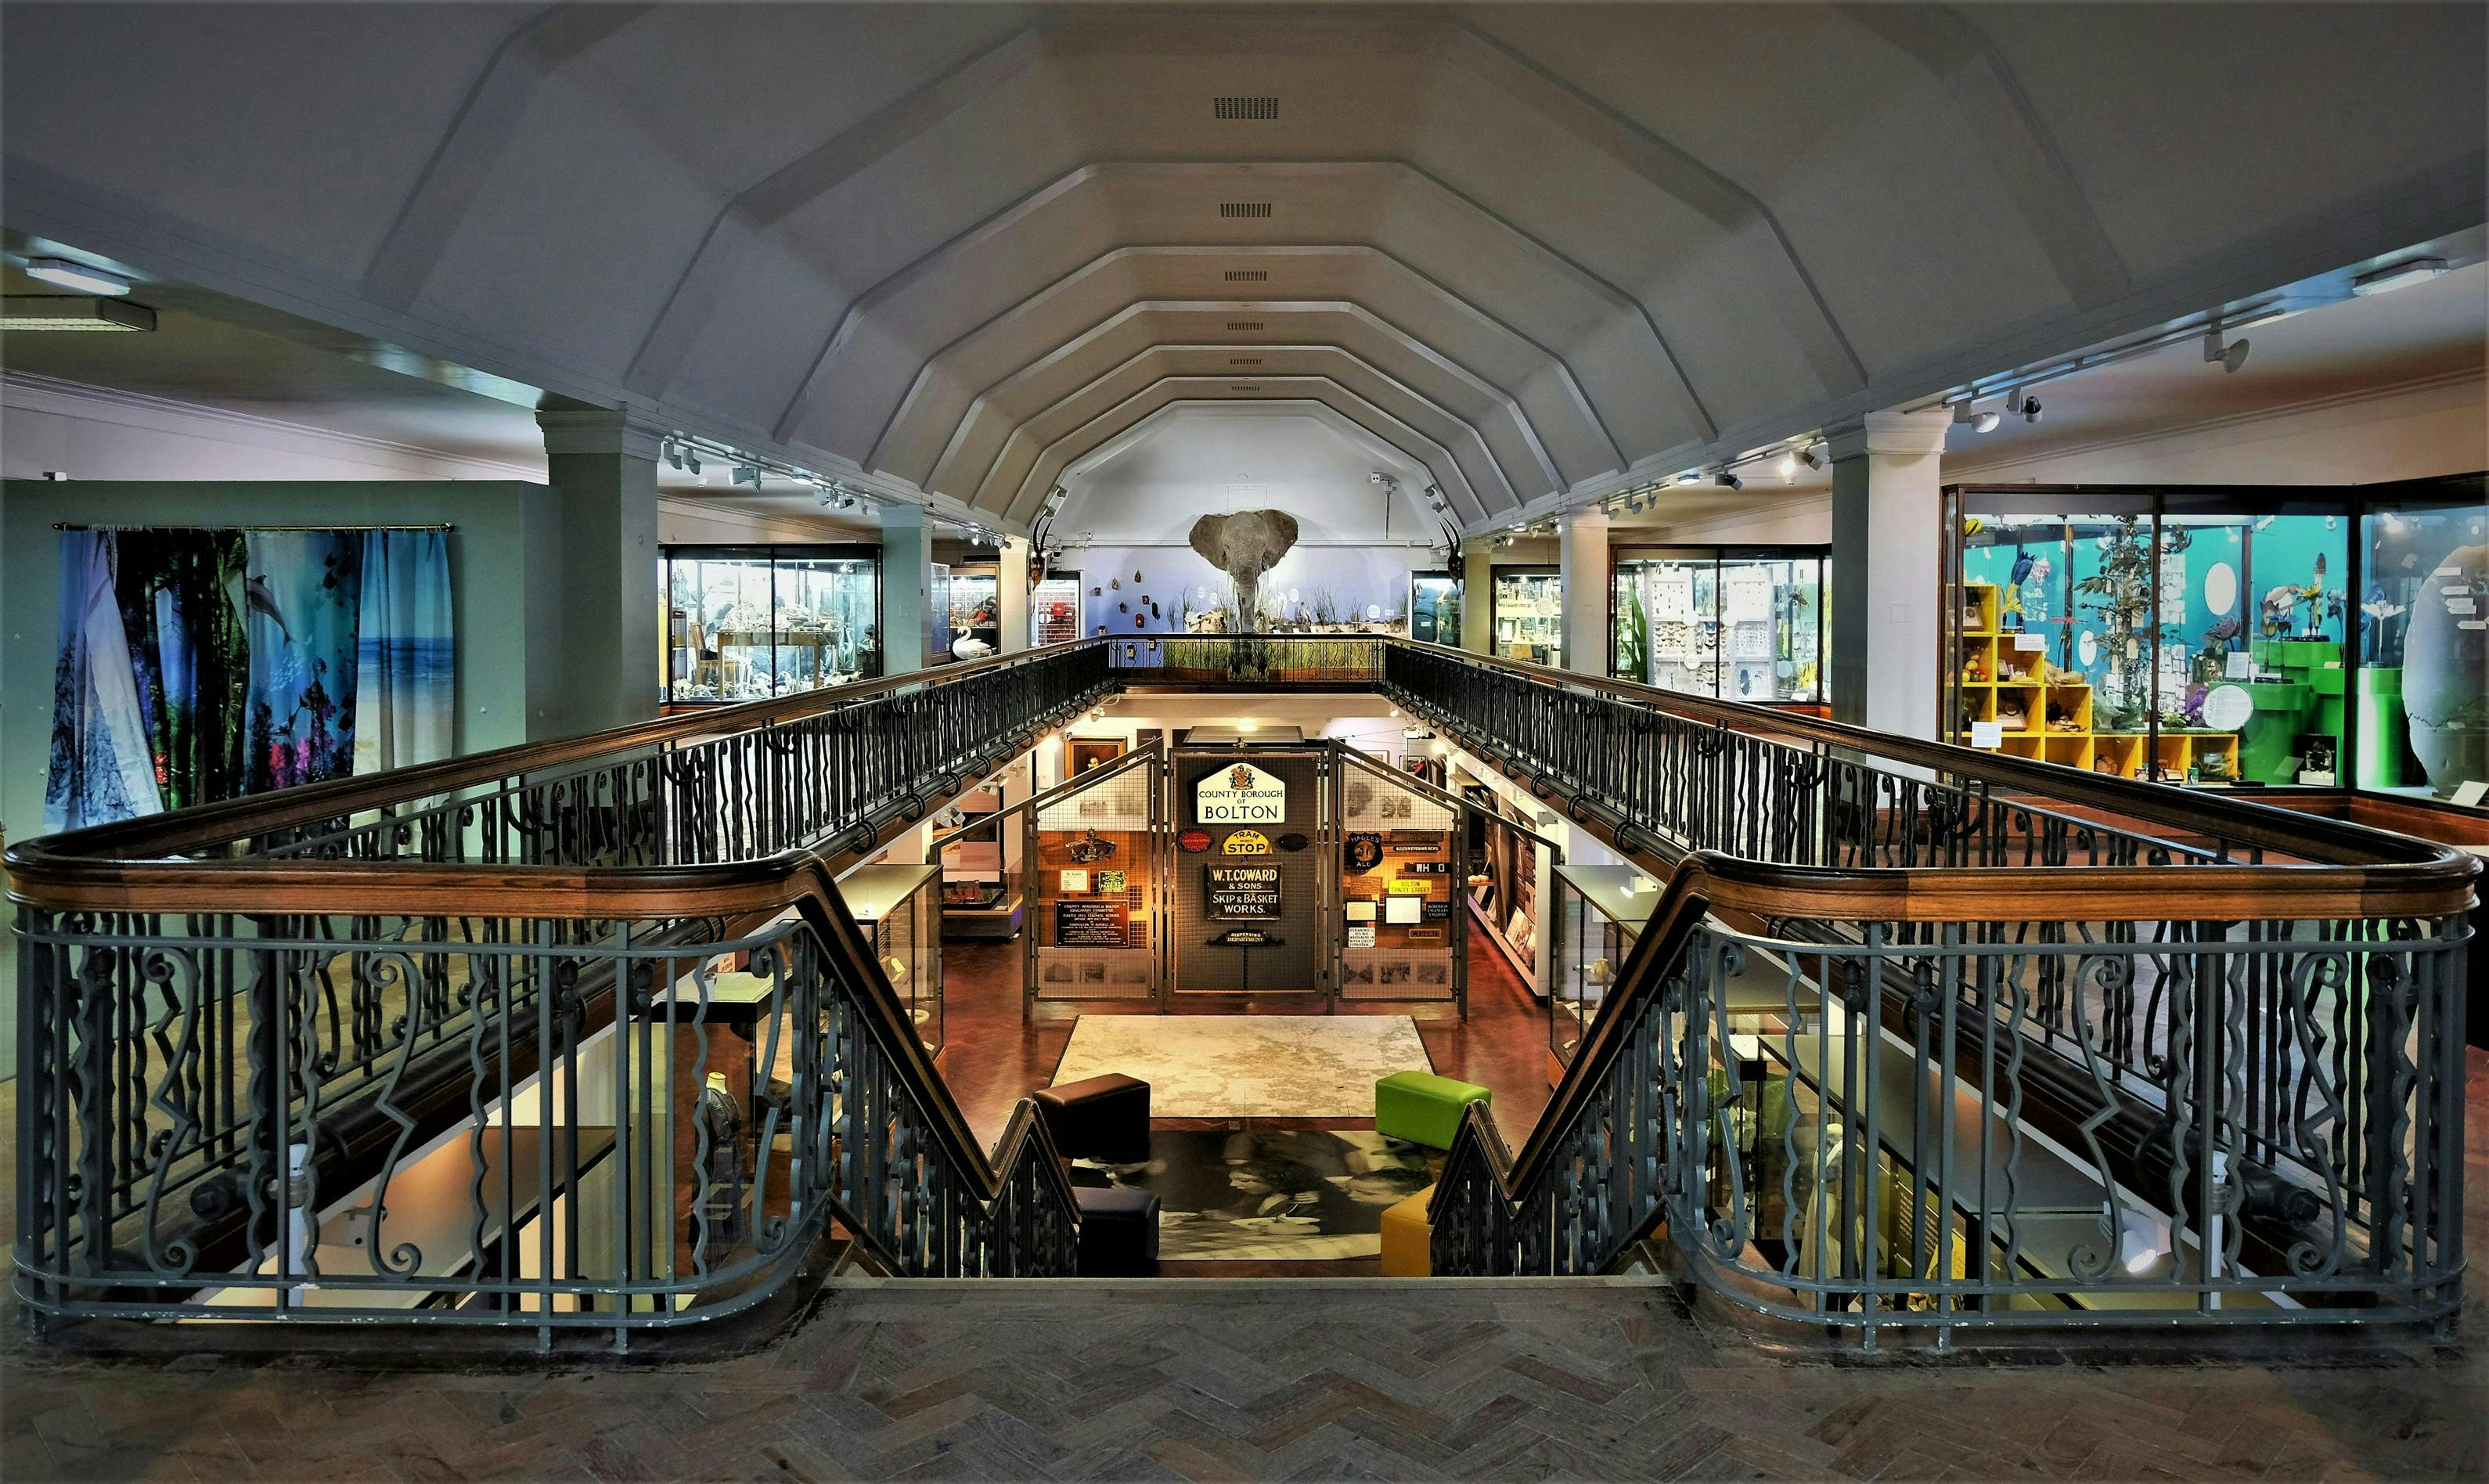 Image of the interior of a shopping centre with an ornate staircase and various window displays